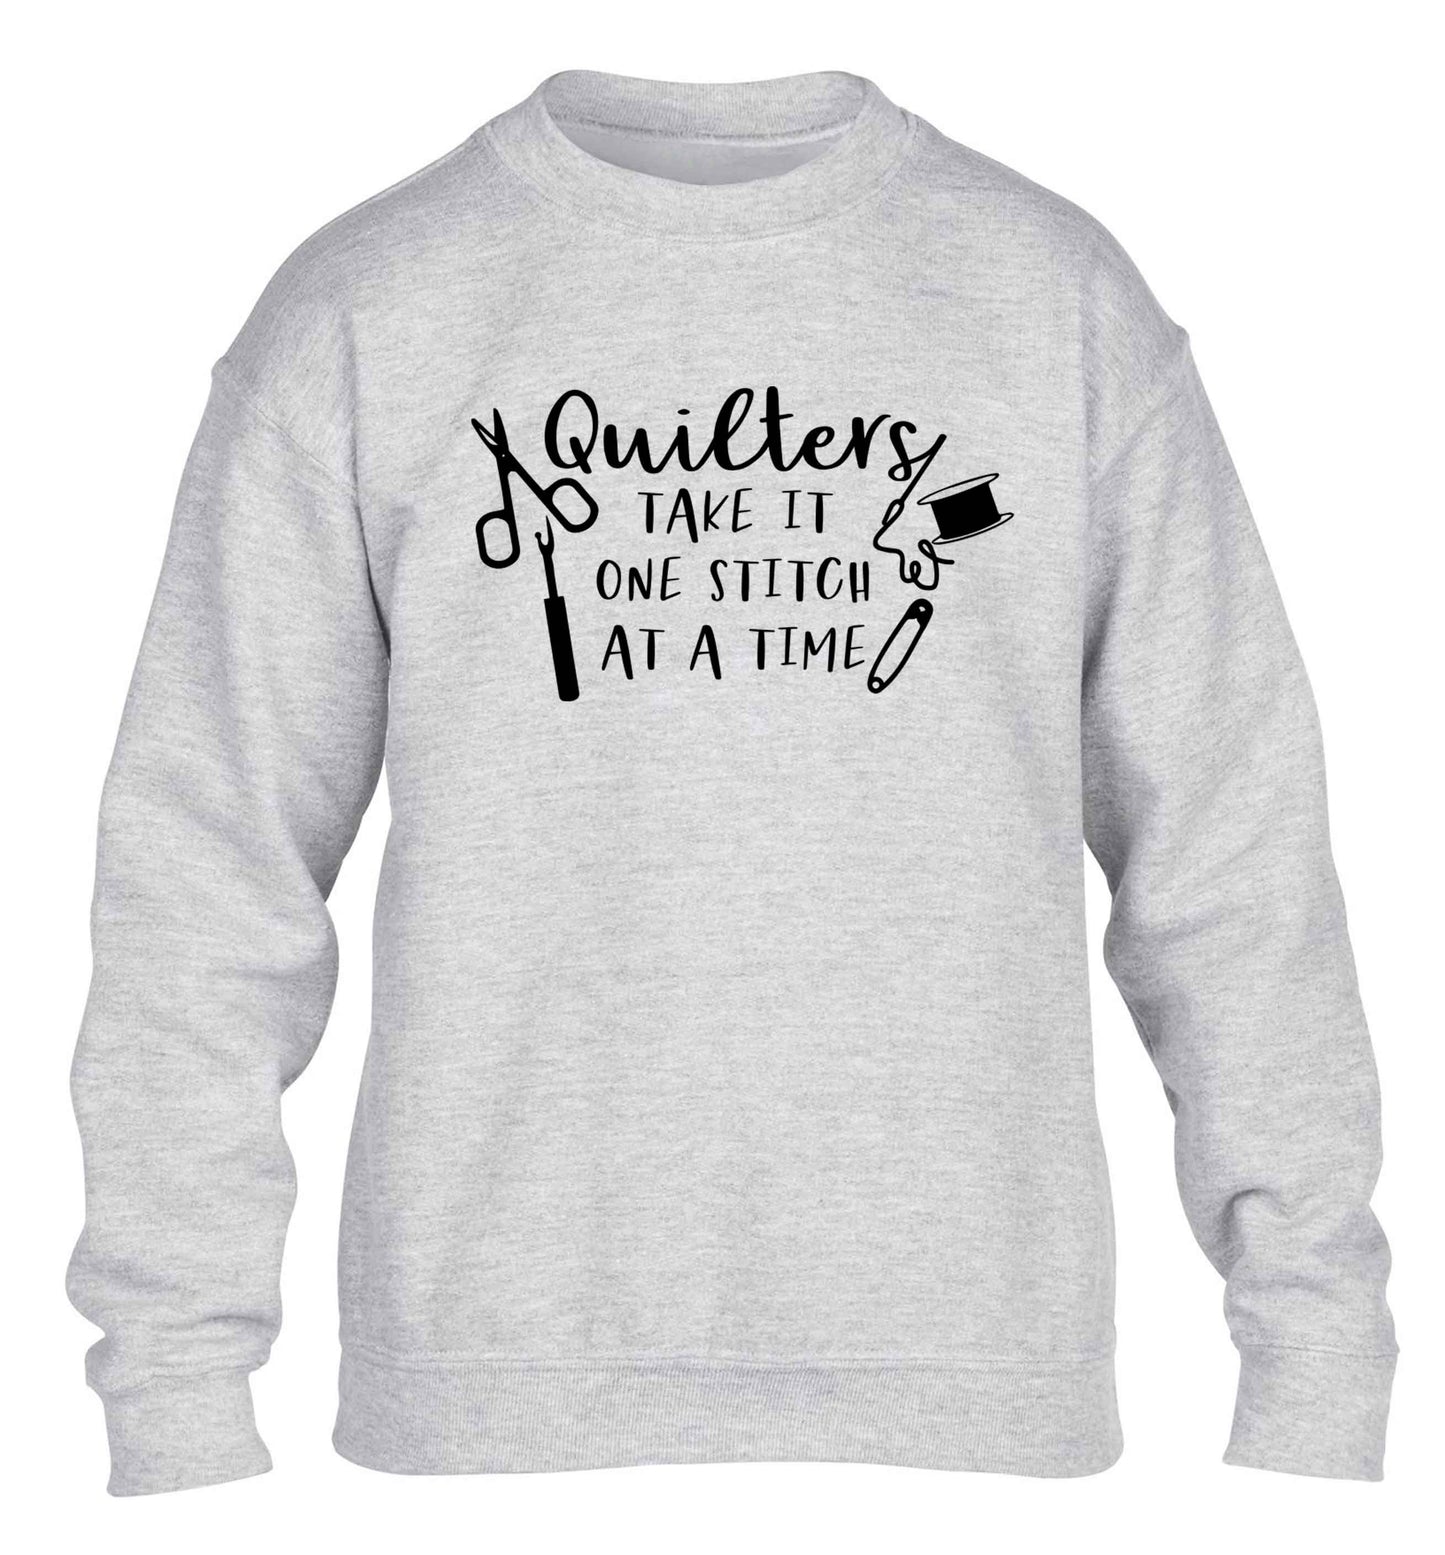 Quilters take it one stitch at a time  children's grey sweater 12-13 Years